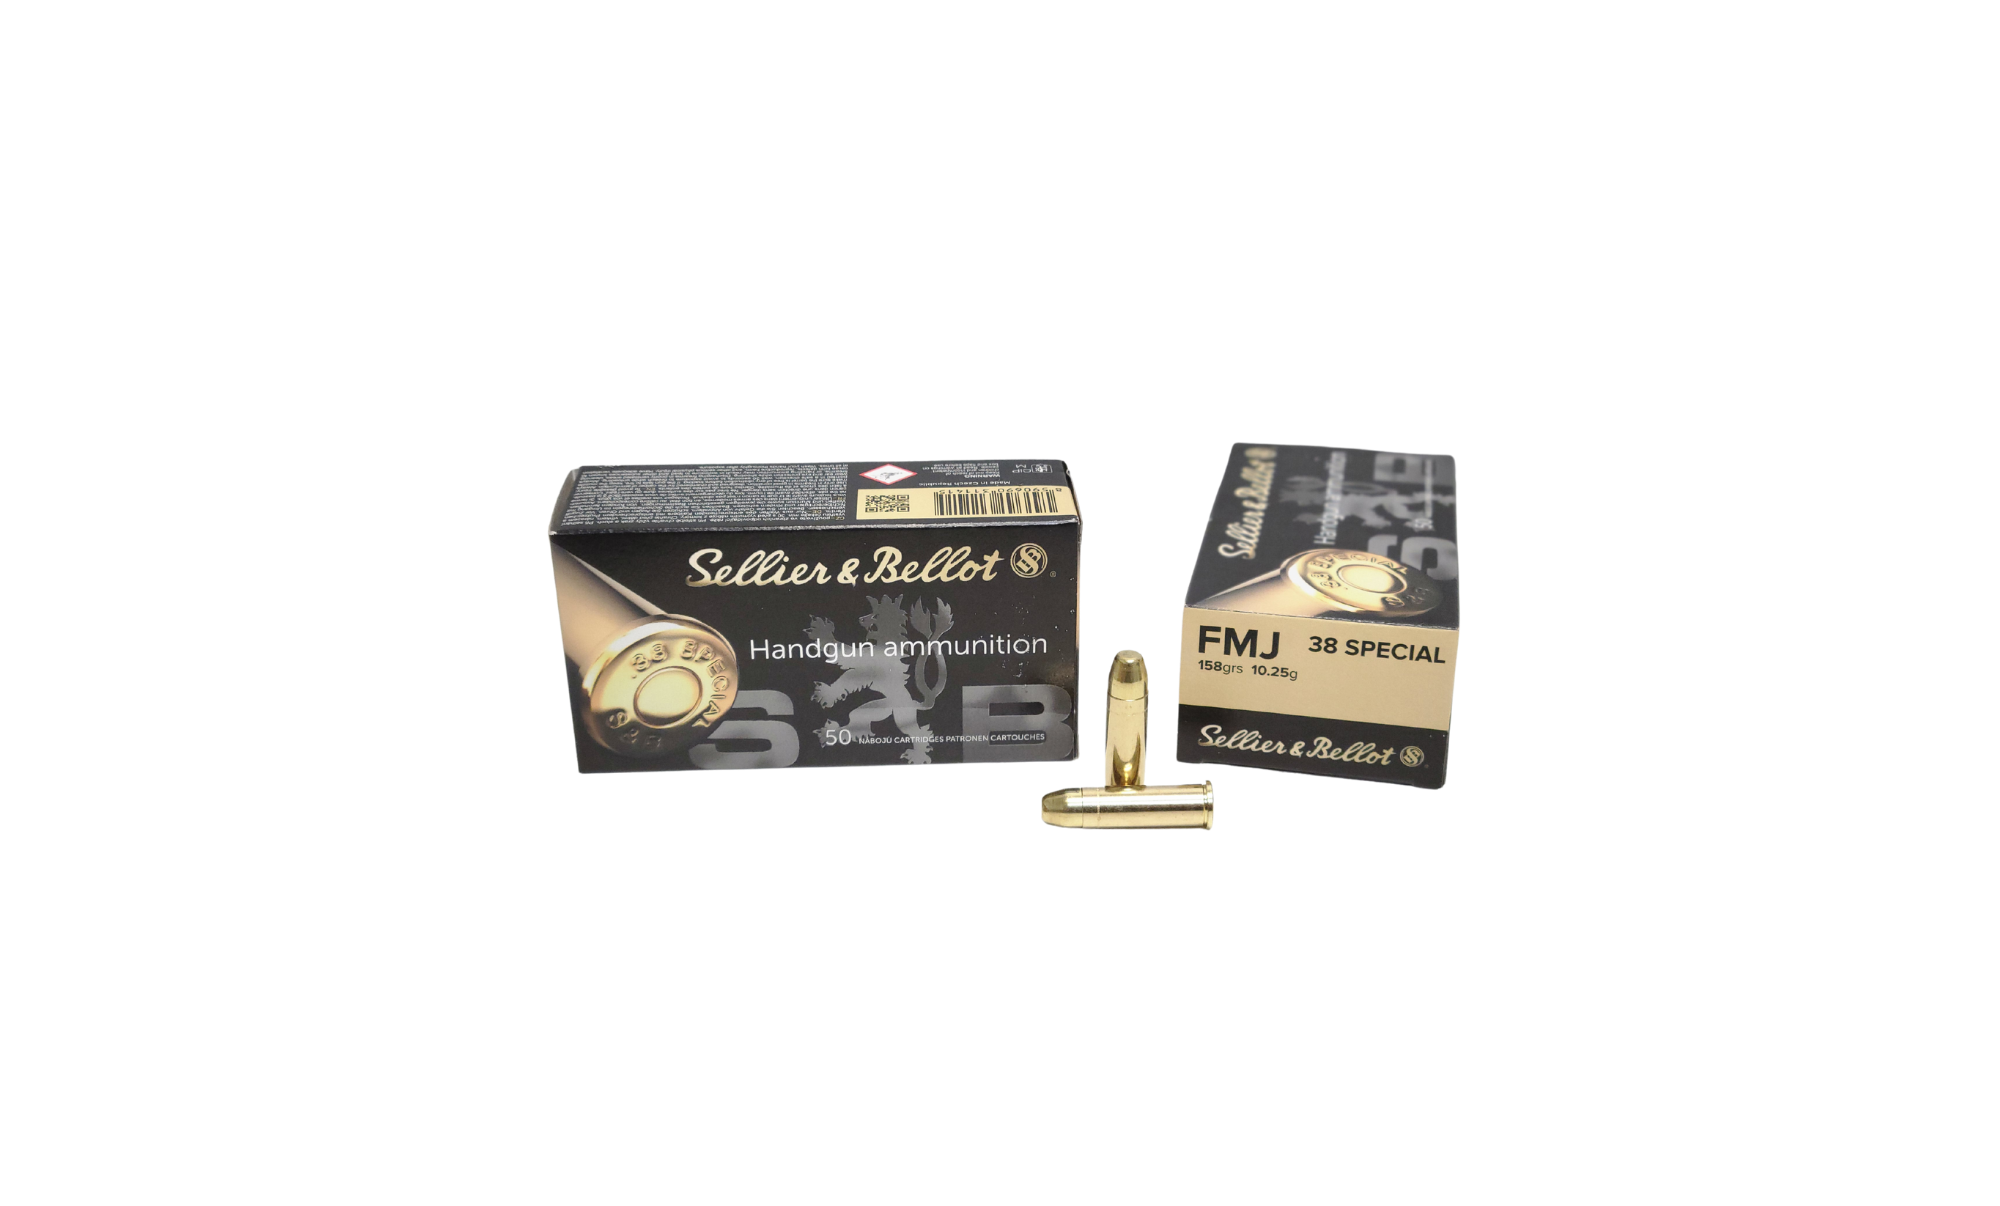 Federal American Eagle CASE .40 S&W SAME DAY SHIPPING 180 Grain FMJ – 1,000 Rounds (CASE) [NO TAX outside Texas] Product Image